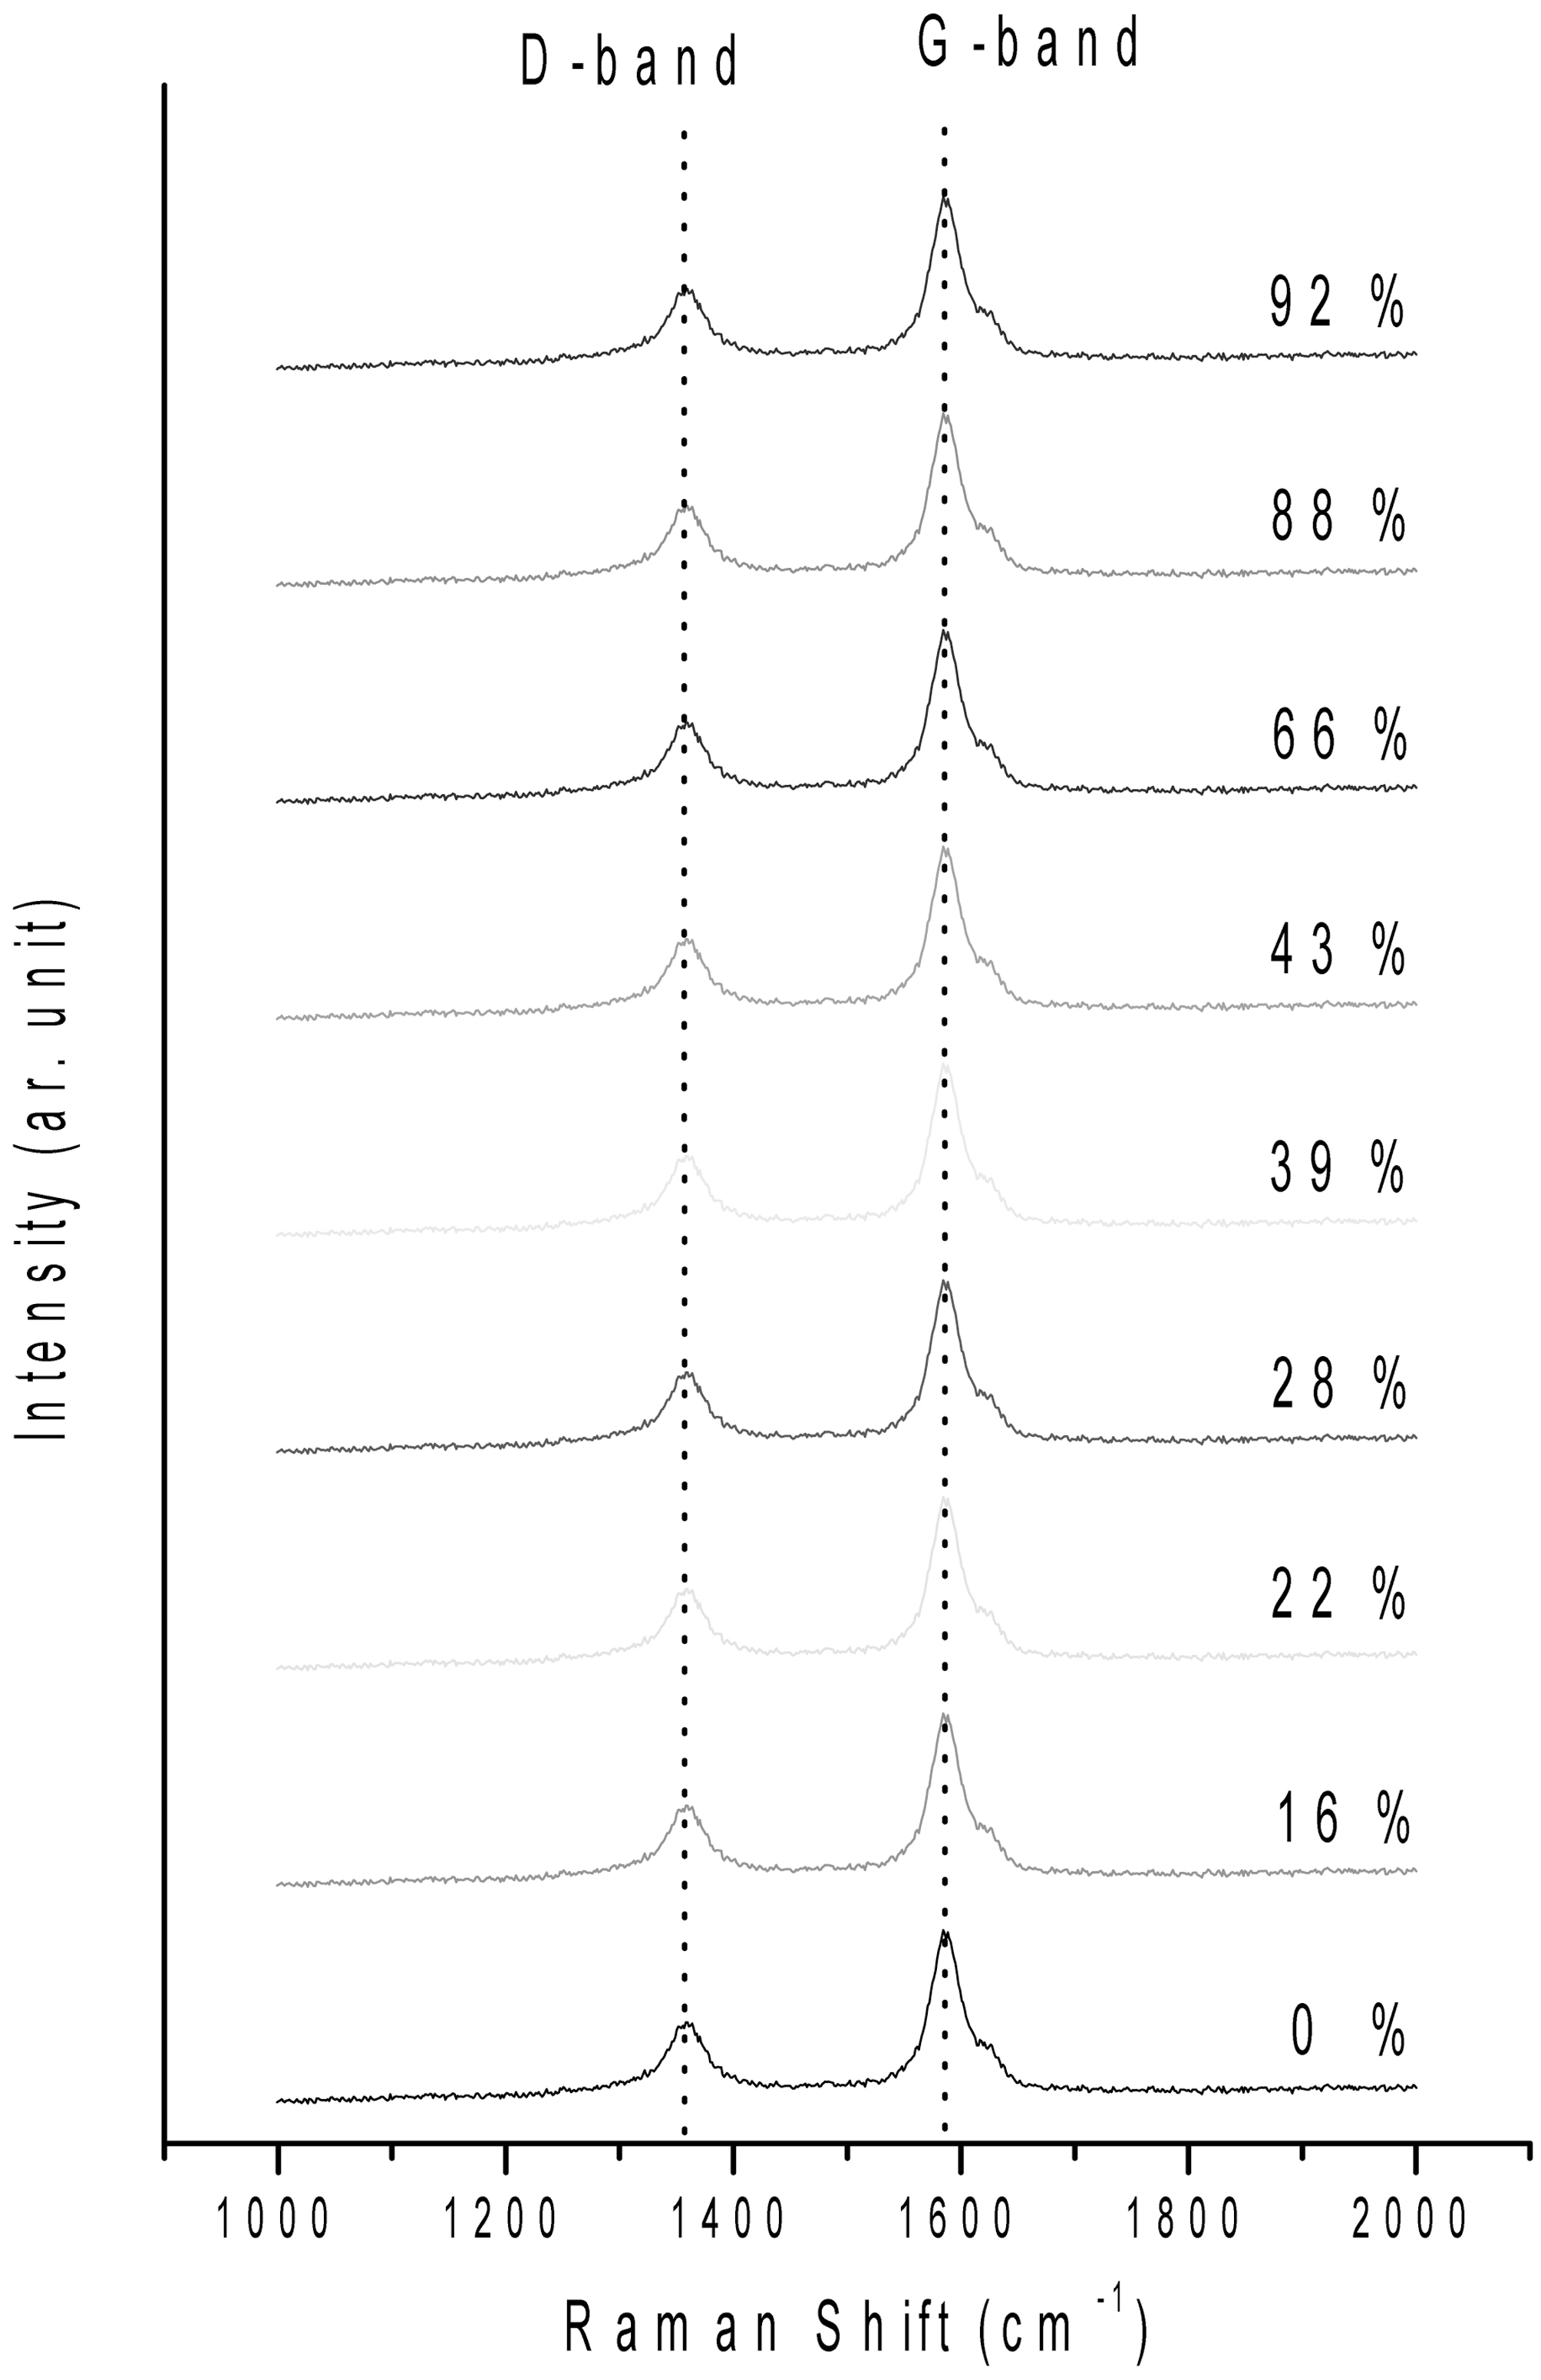 The first-order D and G-bands of the HM fibers shown as a function of burn-off degrees.